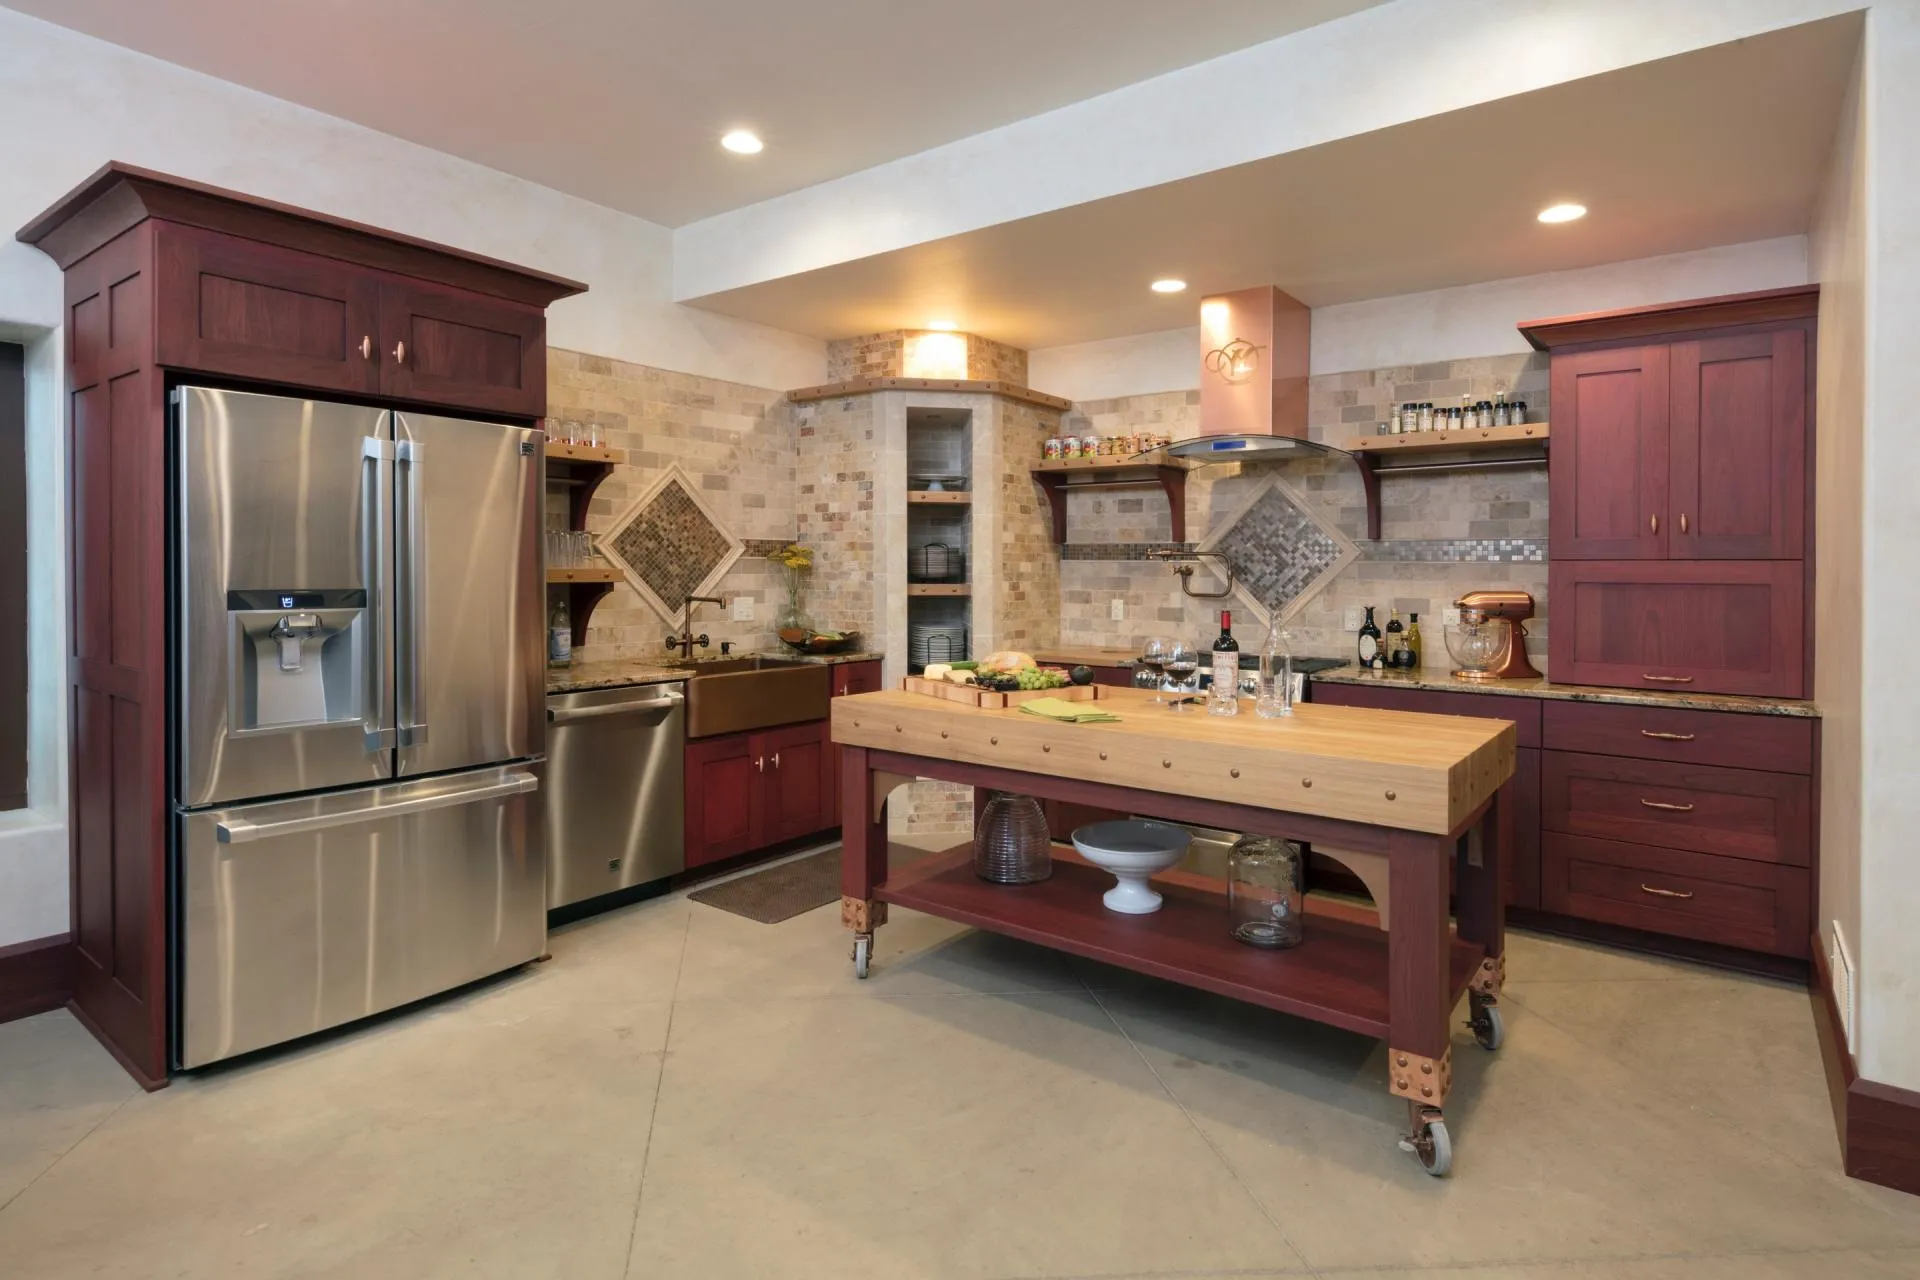 Kitchen Remodeling With Red Cabinets